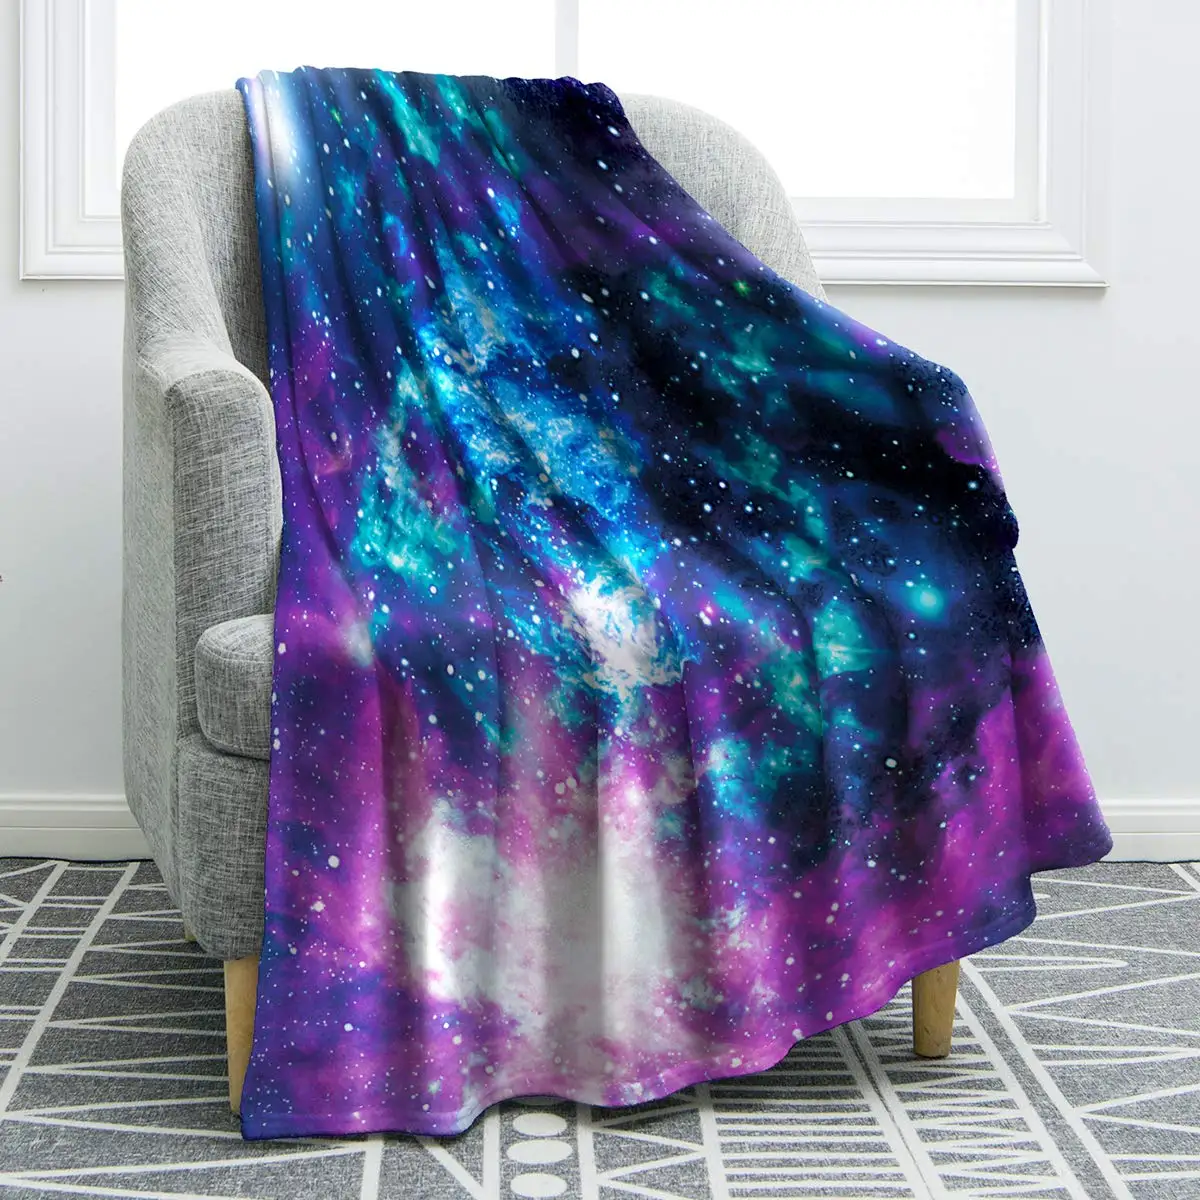 

Galaxy Blanket Soft Comfortable Purple Print Throw Blanket for Sofa Chair Bed Office Ligtweight Durable Birthday Gift Blanket